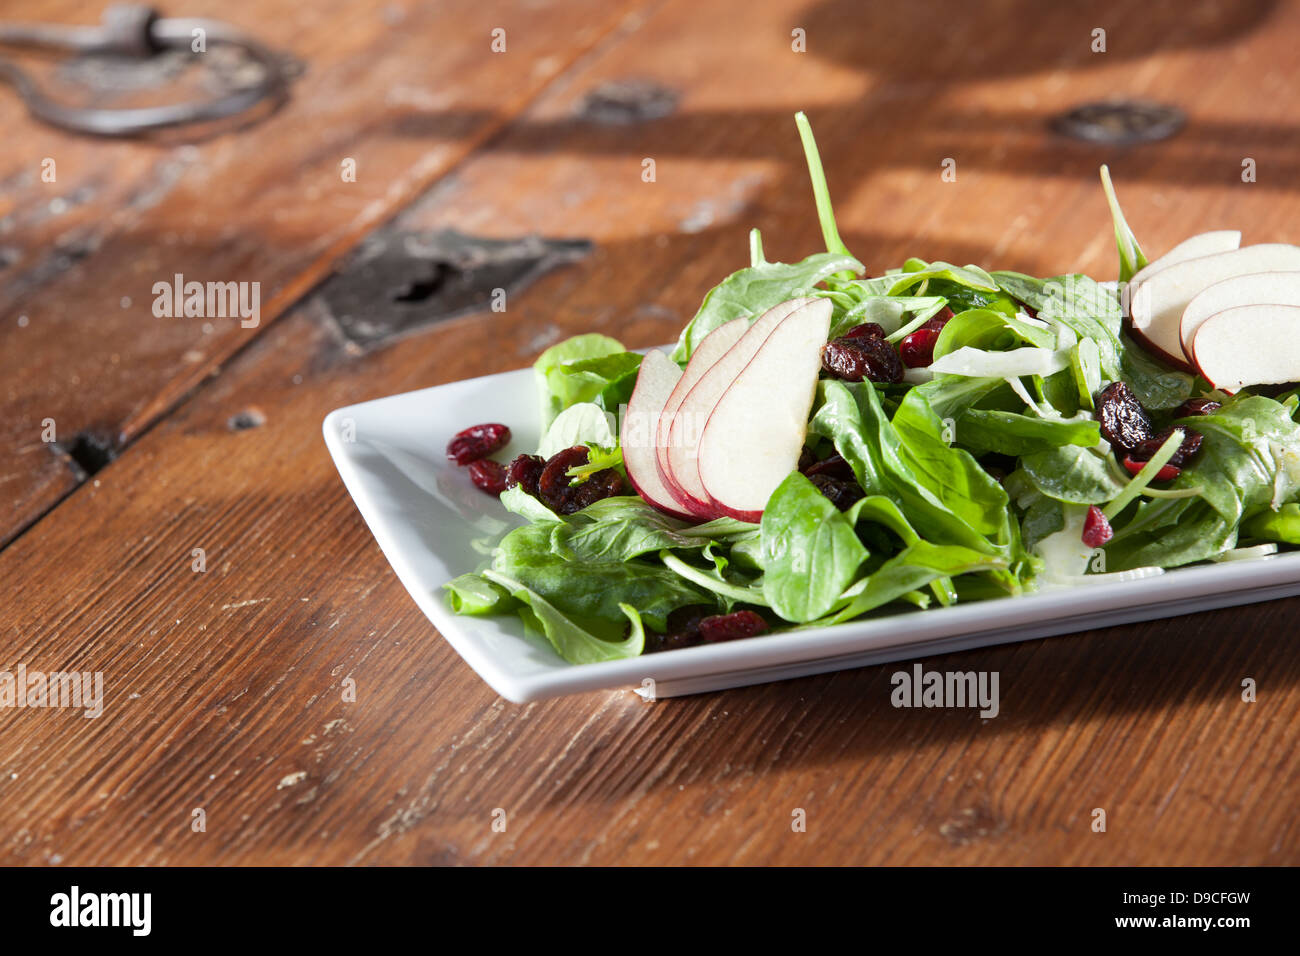 Gourmet artisan spinach, cranberry and pear salad sitting on a rustic wooden table in low light, ready to eat. Stock Photo